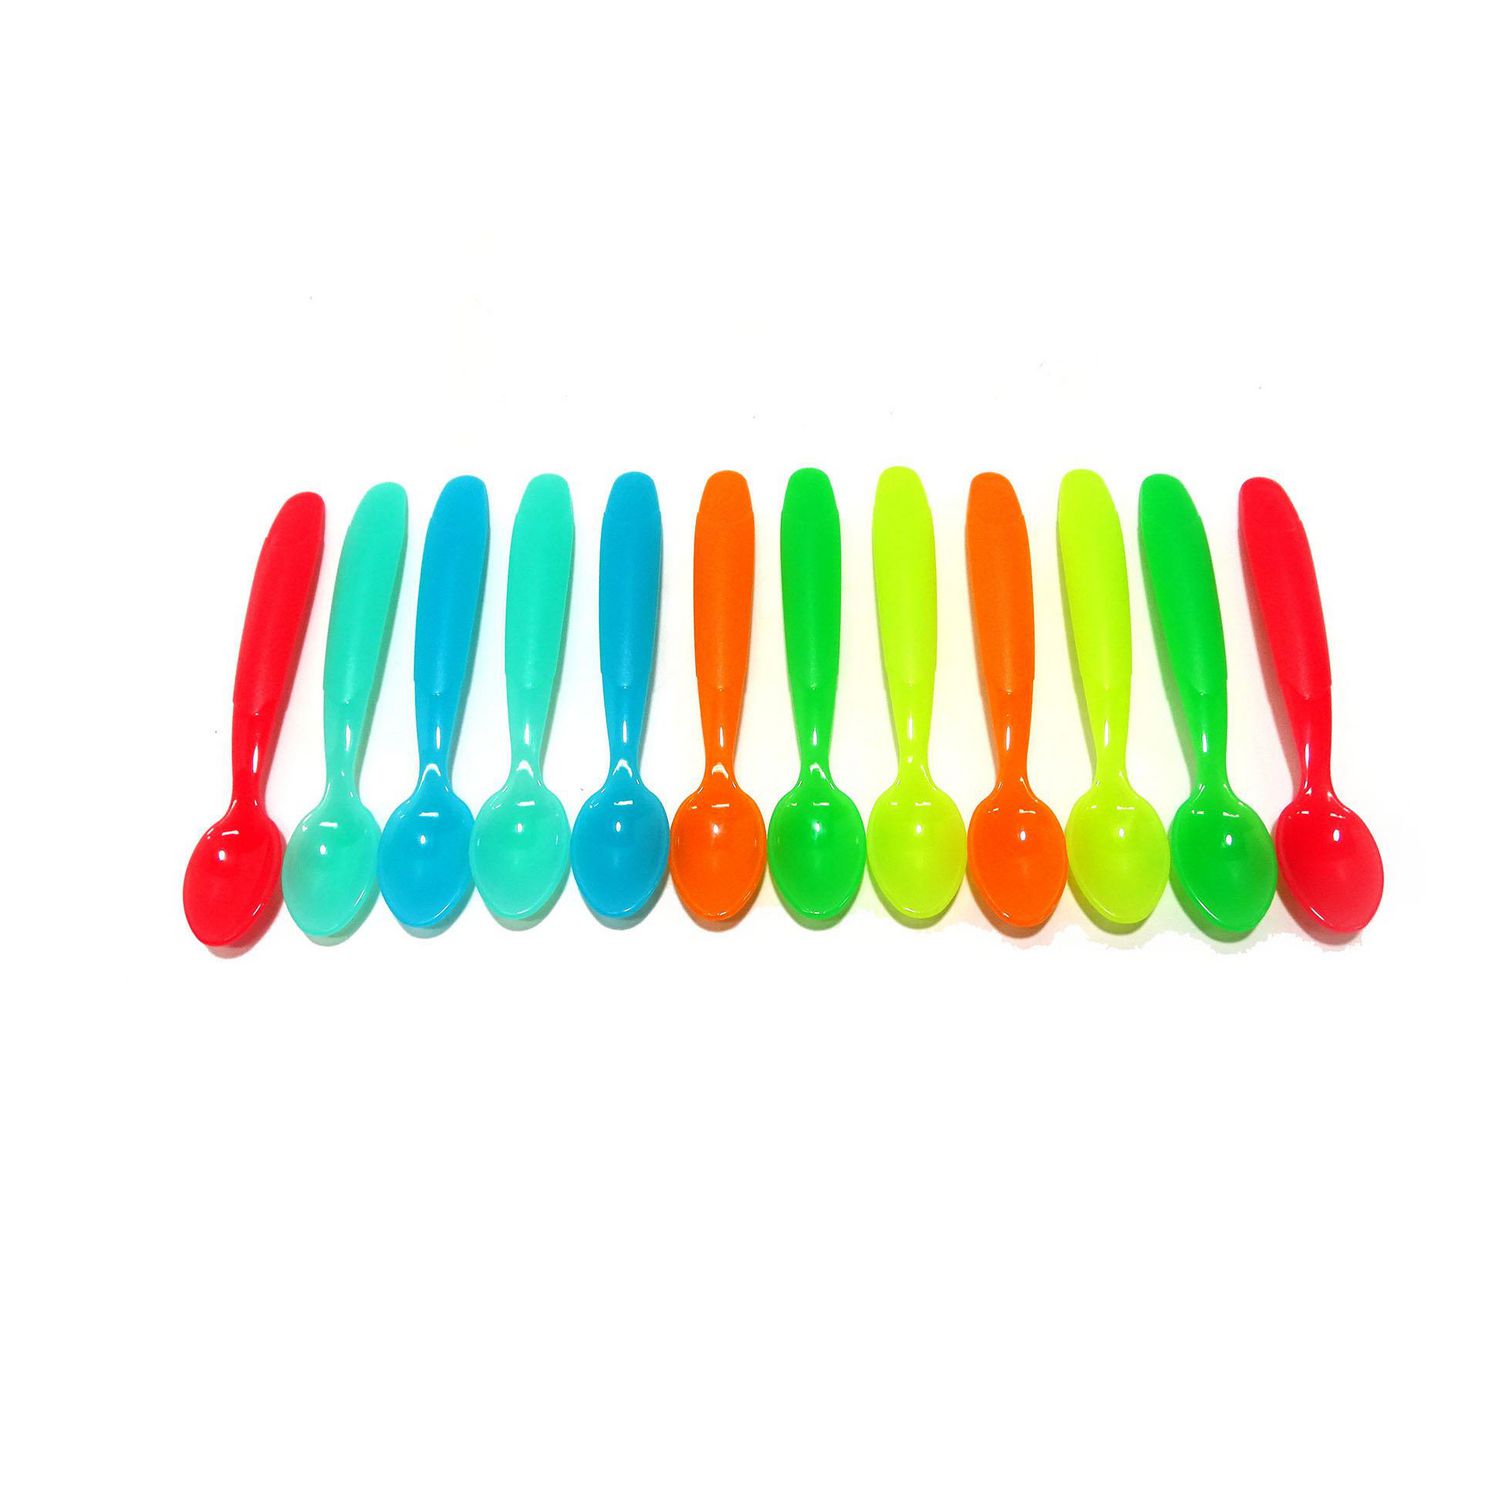 The First Years Take & Toss Infant Spoons 16 pack 4+ Months